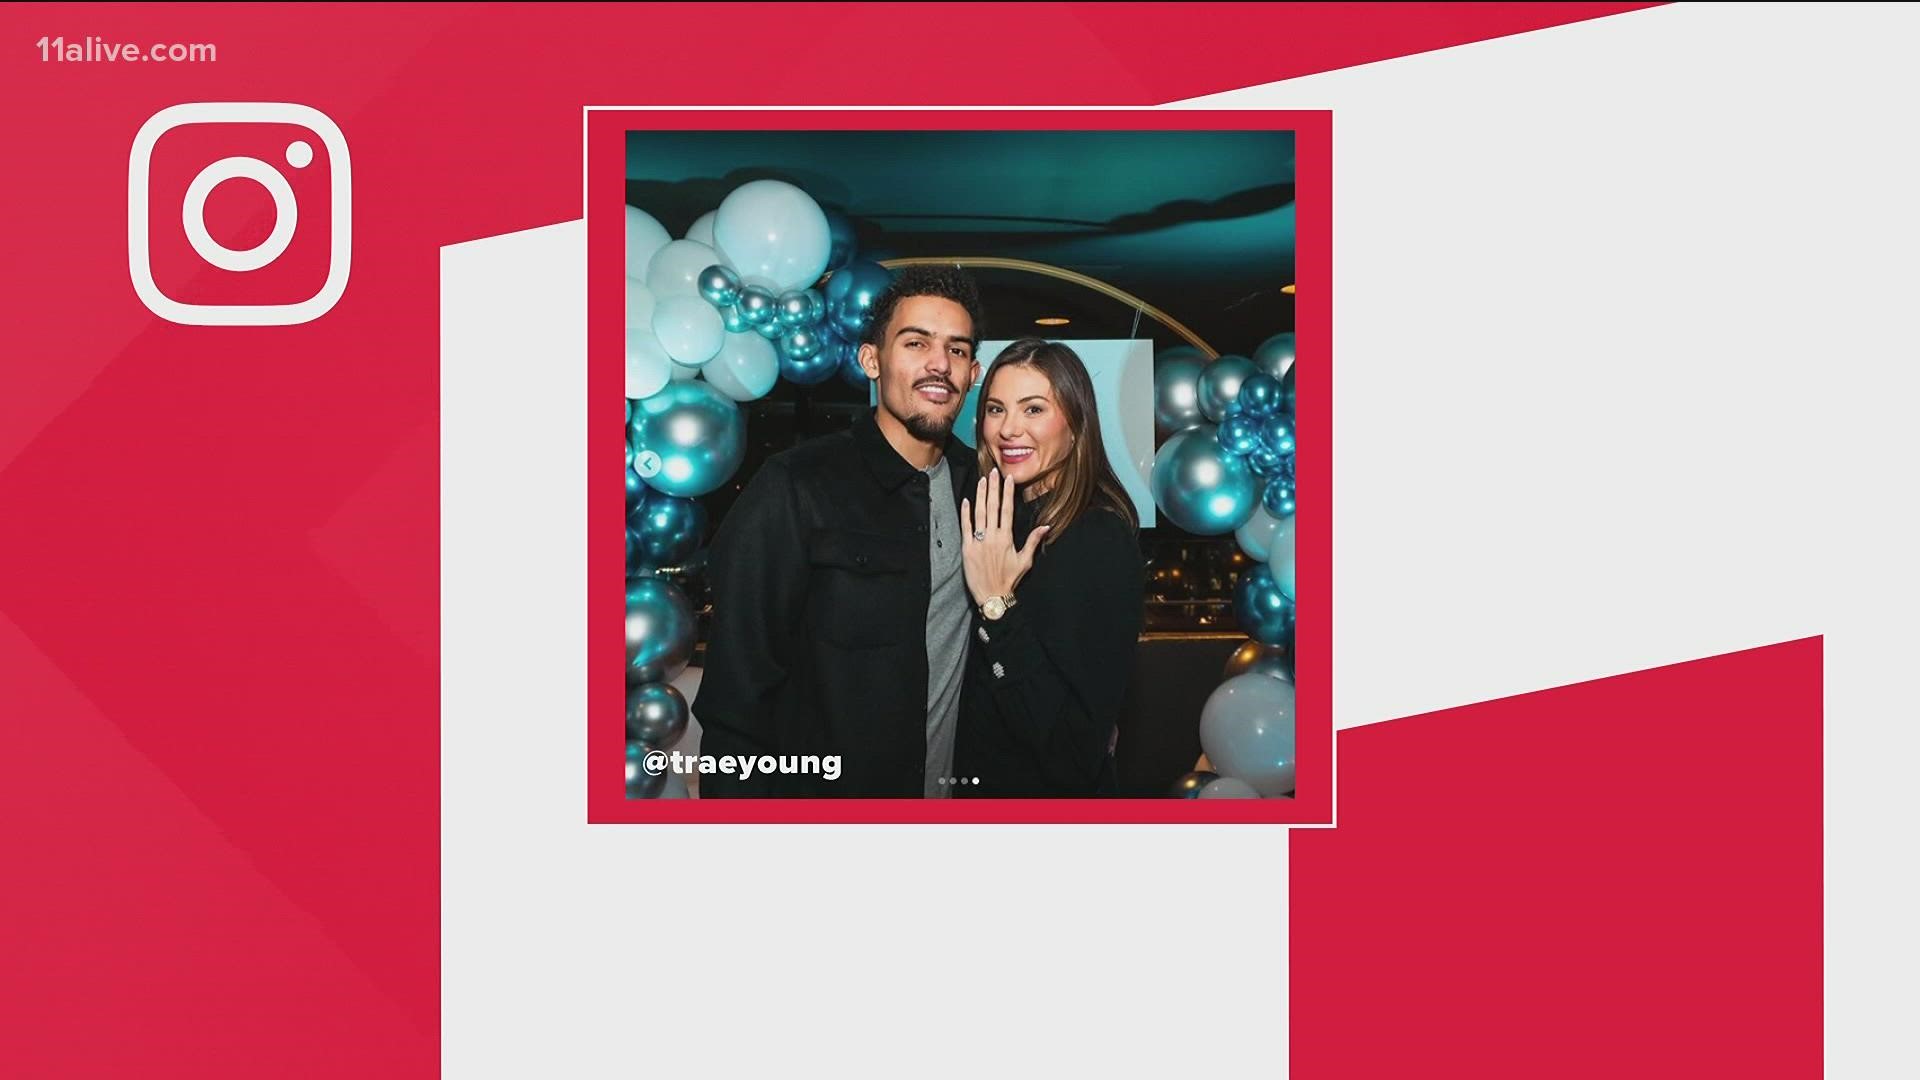 Trae Young proposed to his girlfriend and posted the happy moment to Instagram.